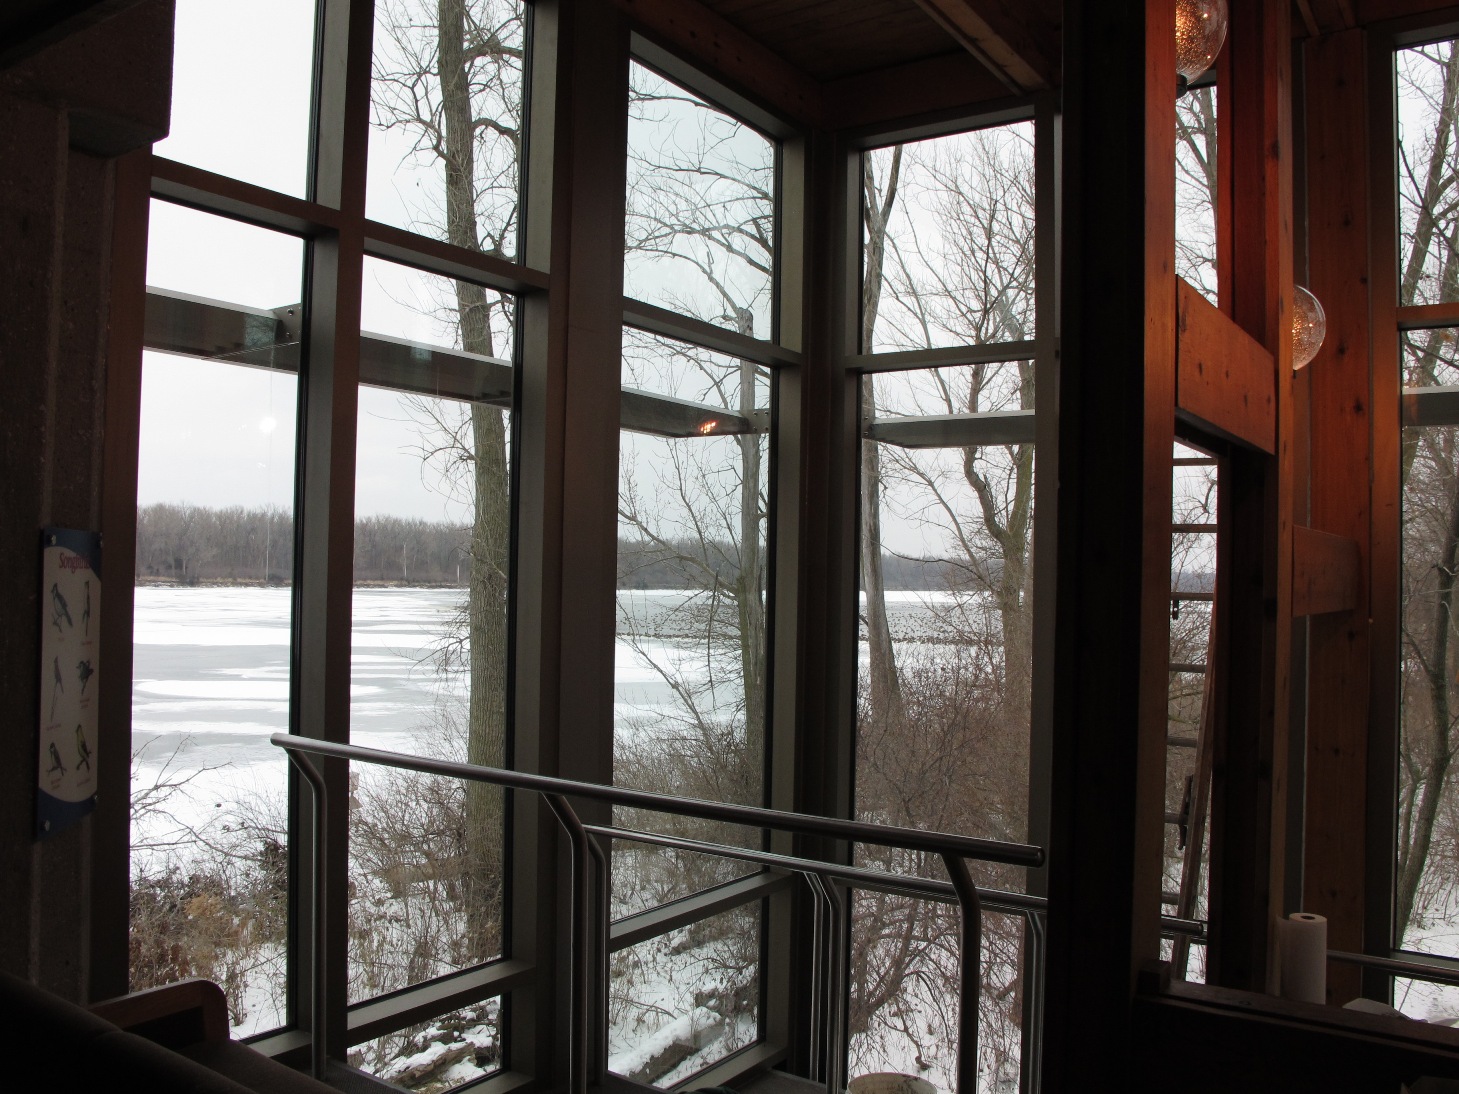 A viewing gallery in the refuge visitor center windows.